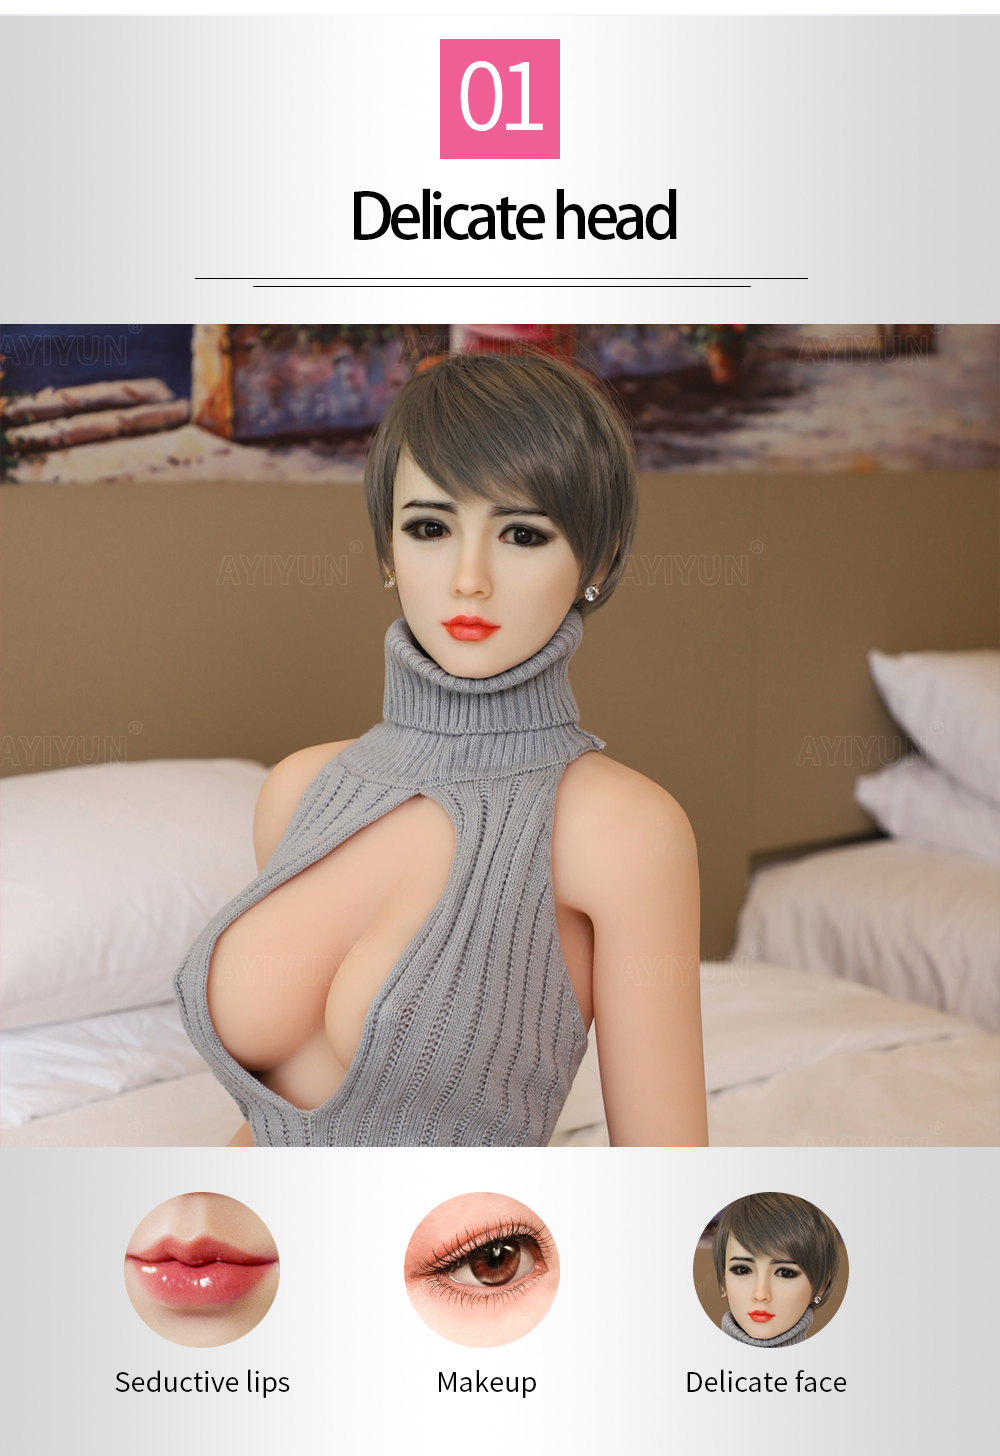 Real Silicone Sex Dolls for Men Realistic Big BreastOral Anal Vagina Full Sex Sexy Love Doll Adult Toys Masturbator Love Dolls,Masturbator,Love Dolls,Adult Dolls,Adult Love Dolls,Masturbator,Love Dolls,Adult Dolls,life-size sex dolls,cheap sex dolls,adult sex dolls,sex dolls,bratz doll,sex with sex doll